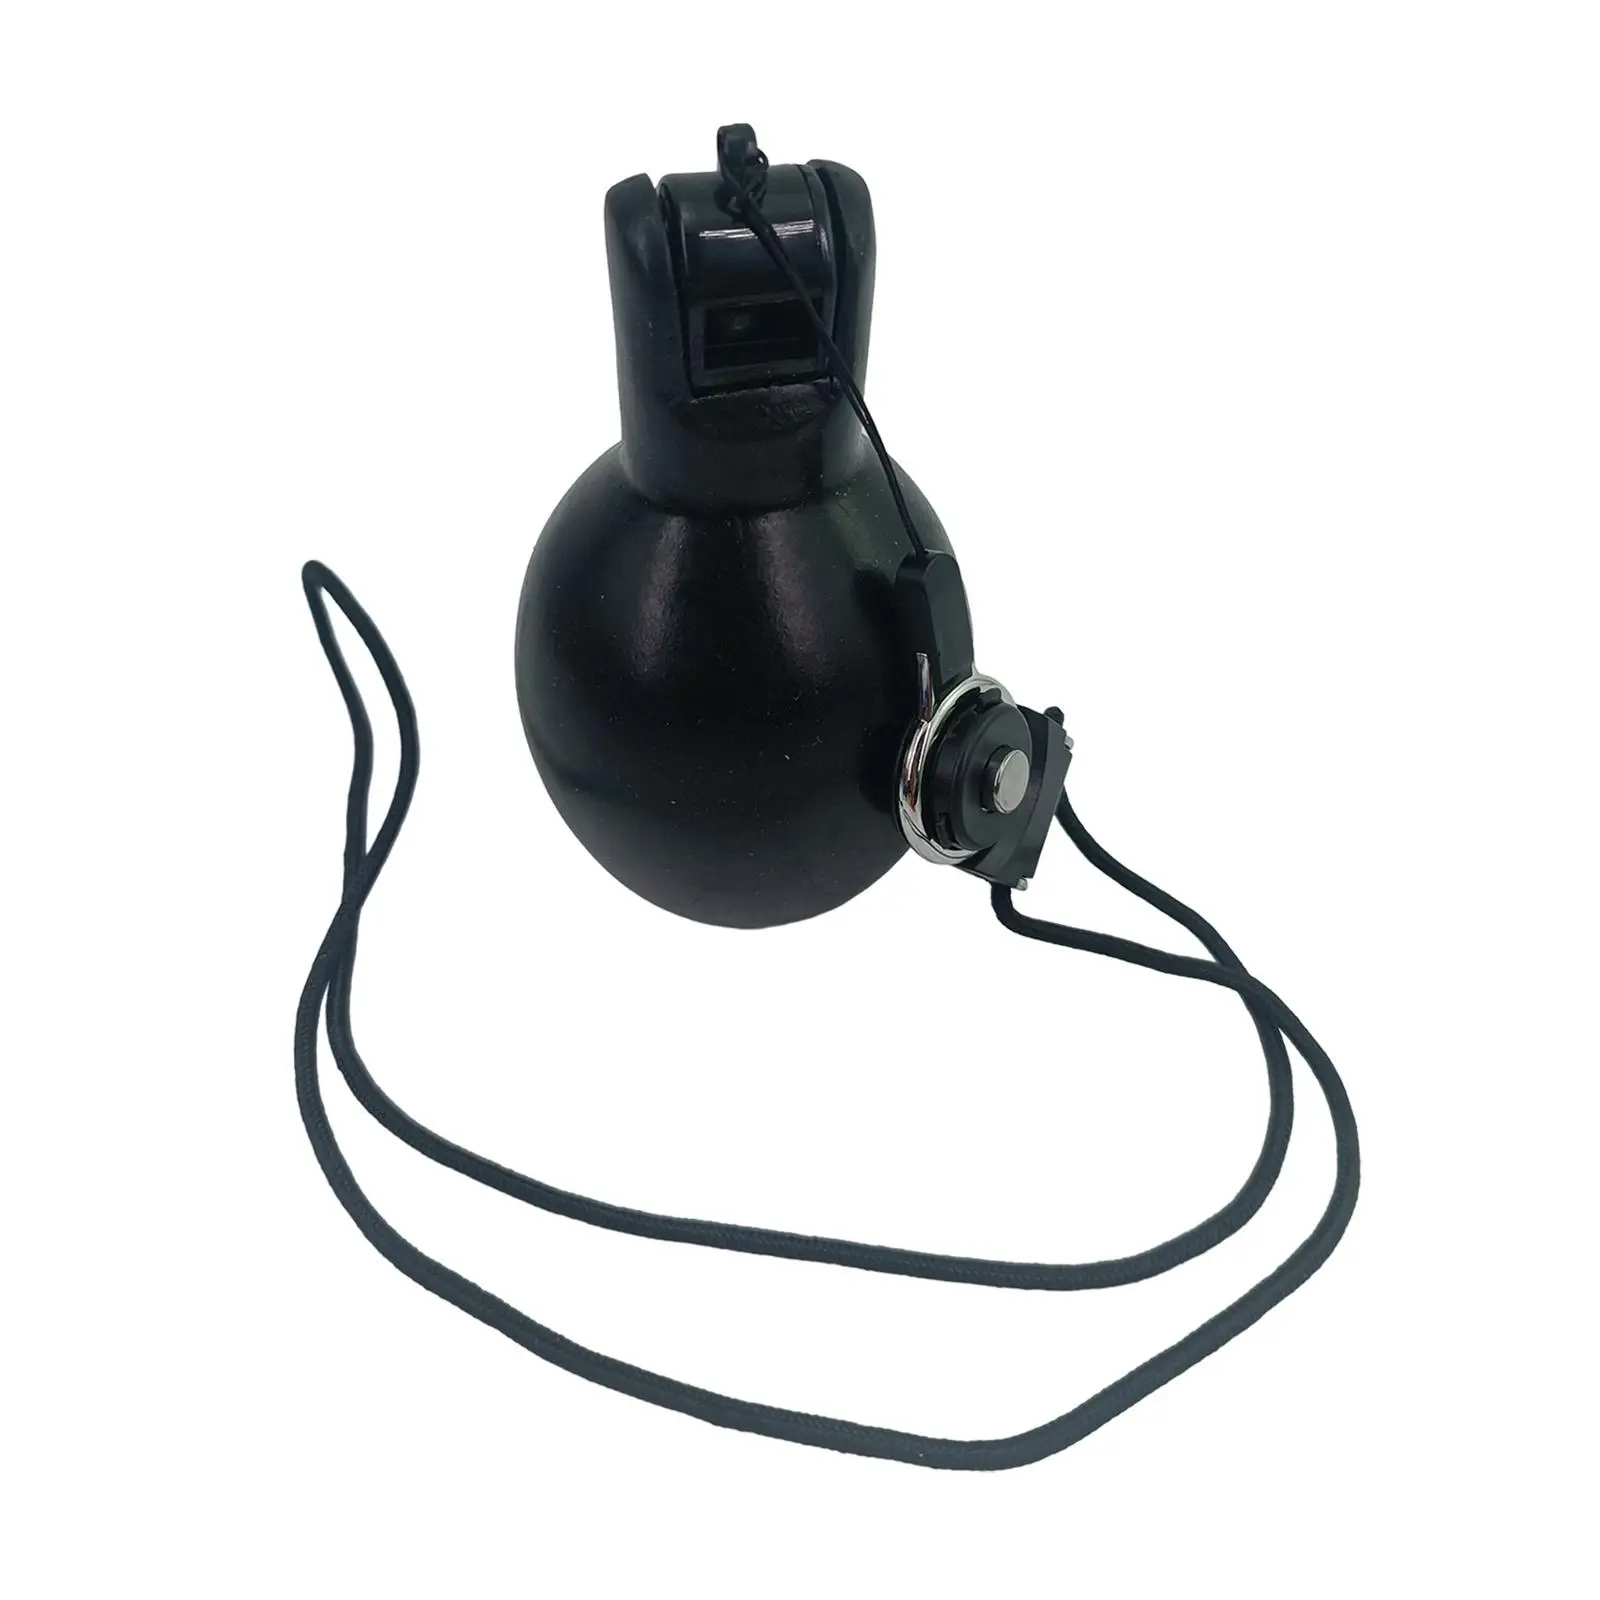 Hand Whistles Portable Loud Sound with Hanging Strap Whistle Sport Whistle for Referees Trekking Emergency Football Basketball